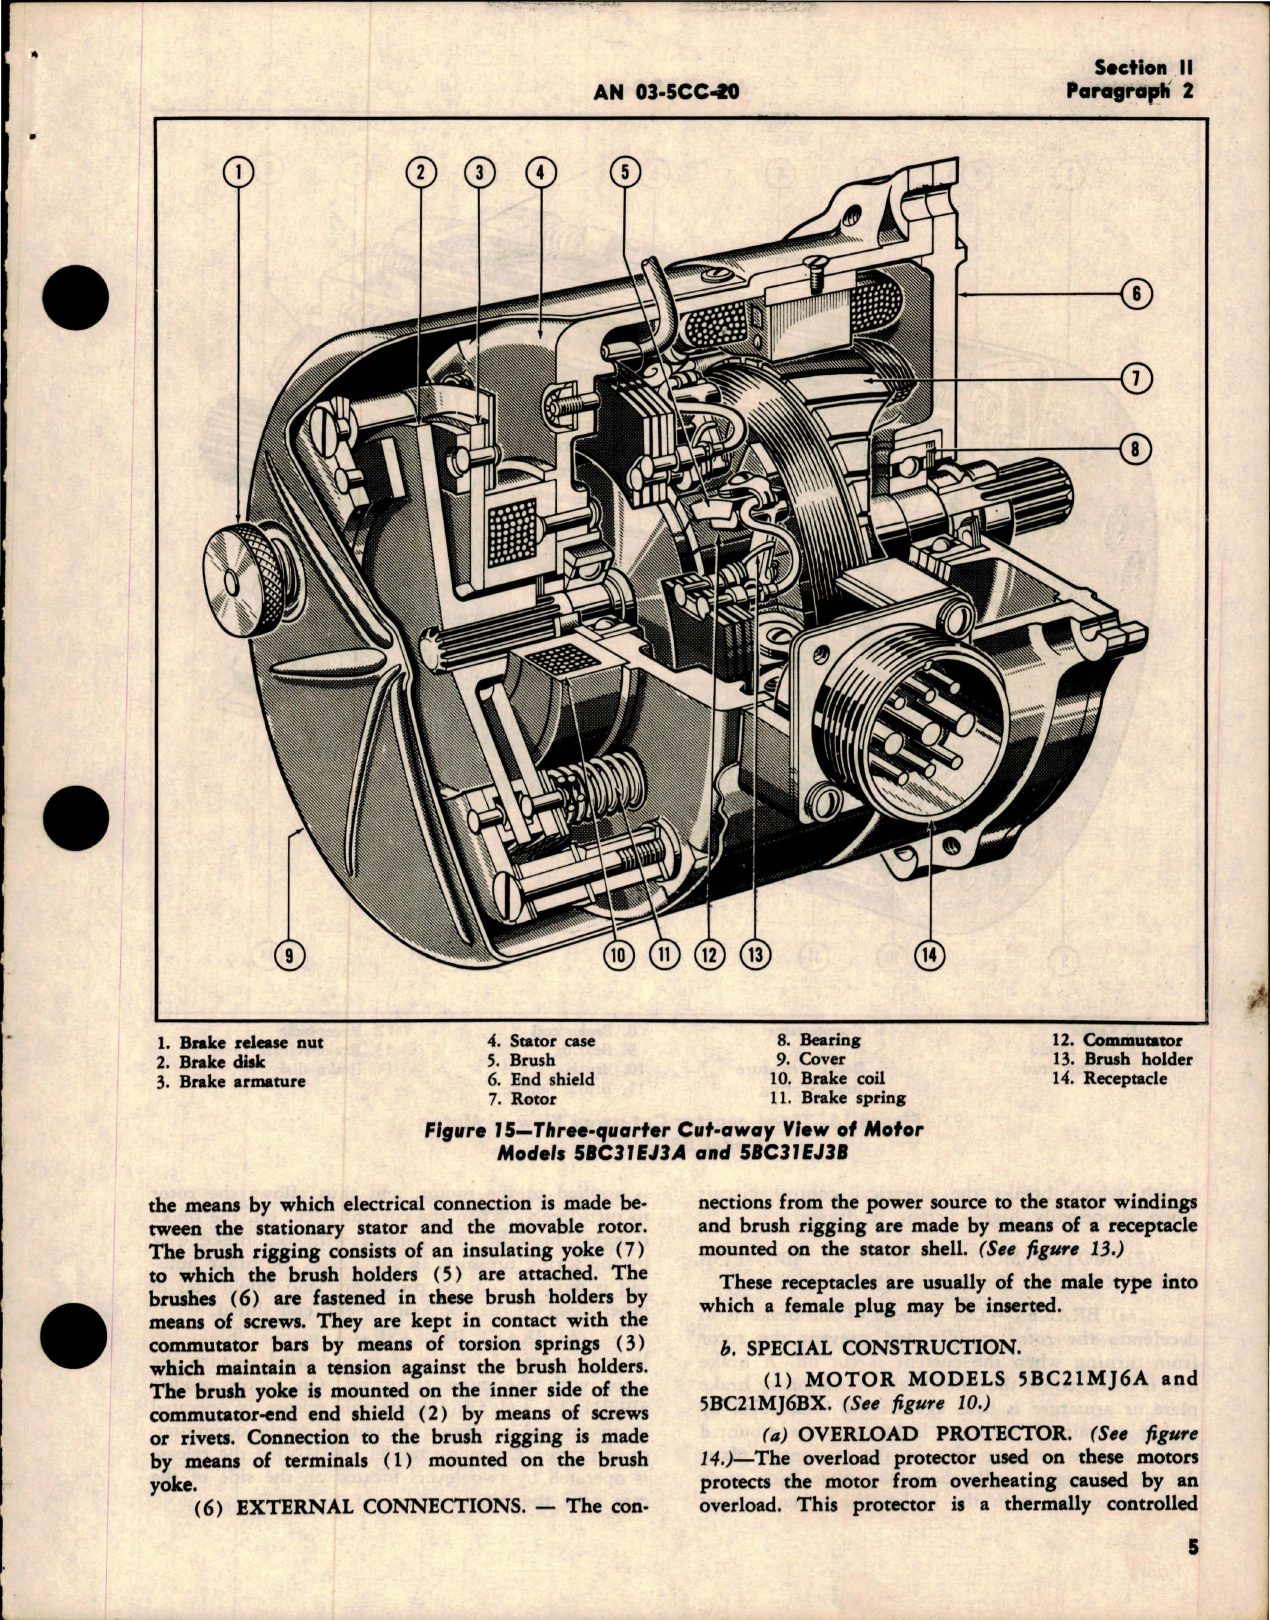 Sample page 9 from AirCorps Library document: Parts Catalog for Aircraft Motors - Models 5BC21 and 5BC31 Series